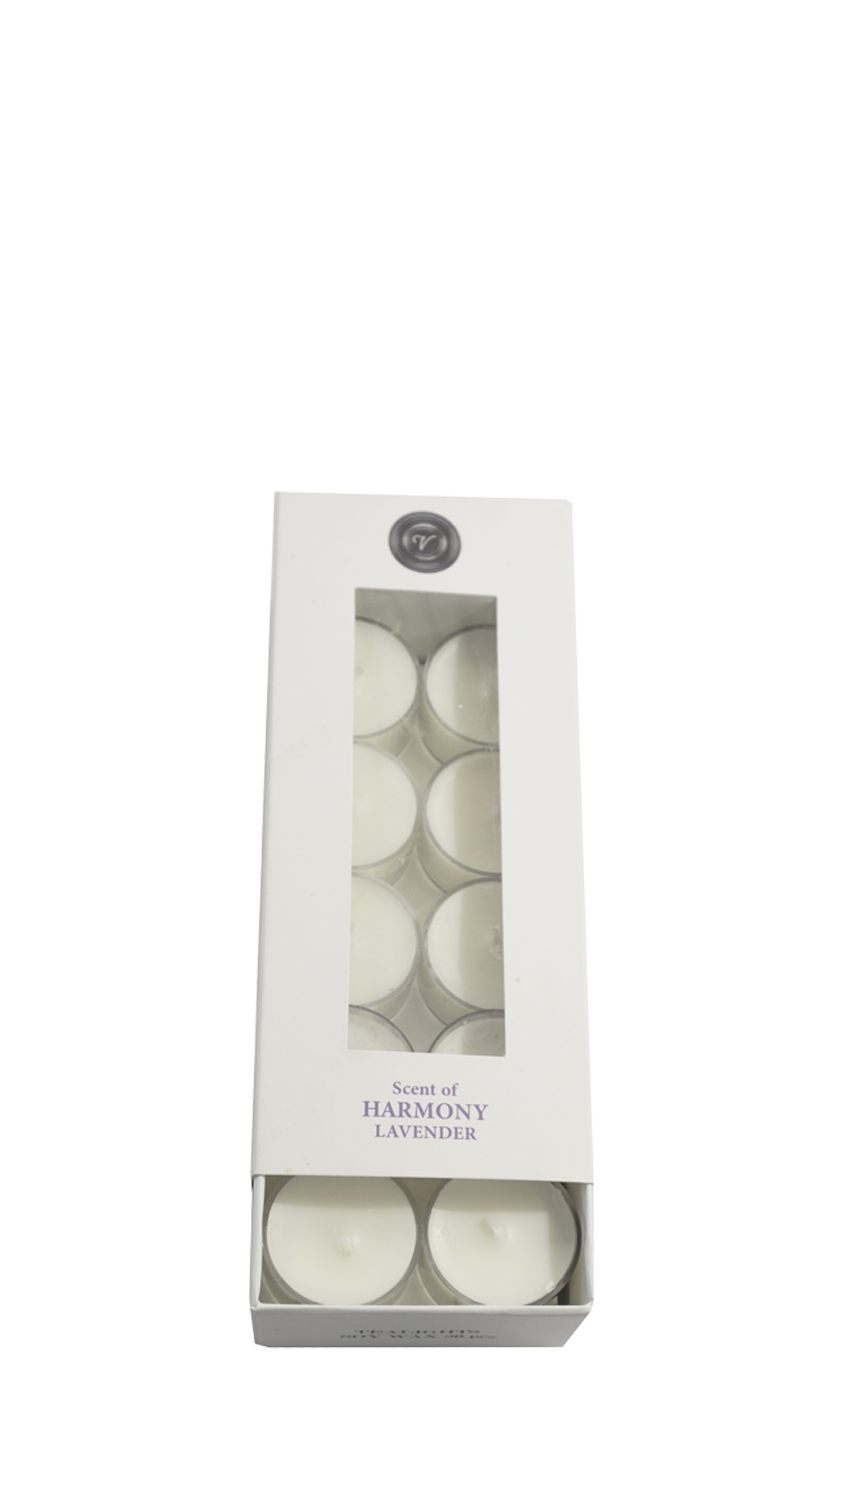 Scented Soy Wax Tealights